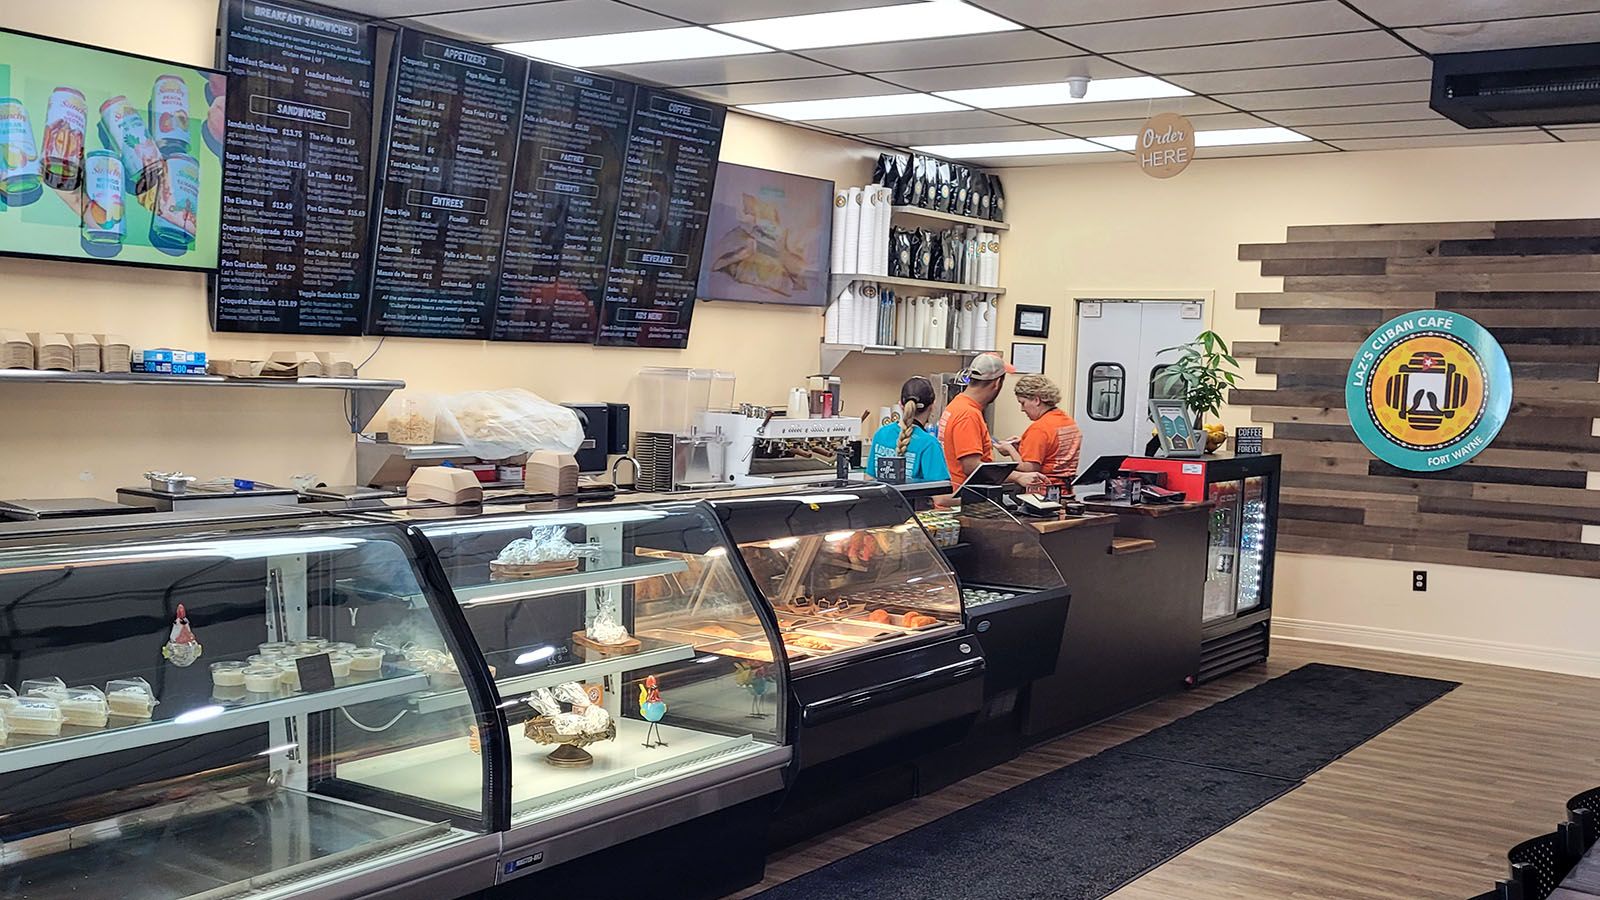 Laz’s Cuban Cafe, 1533 W. Dupont Road, in the Northbrook Village has plenty of sandwich and dessert options.